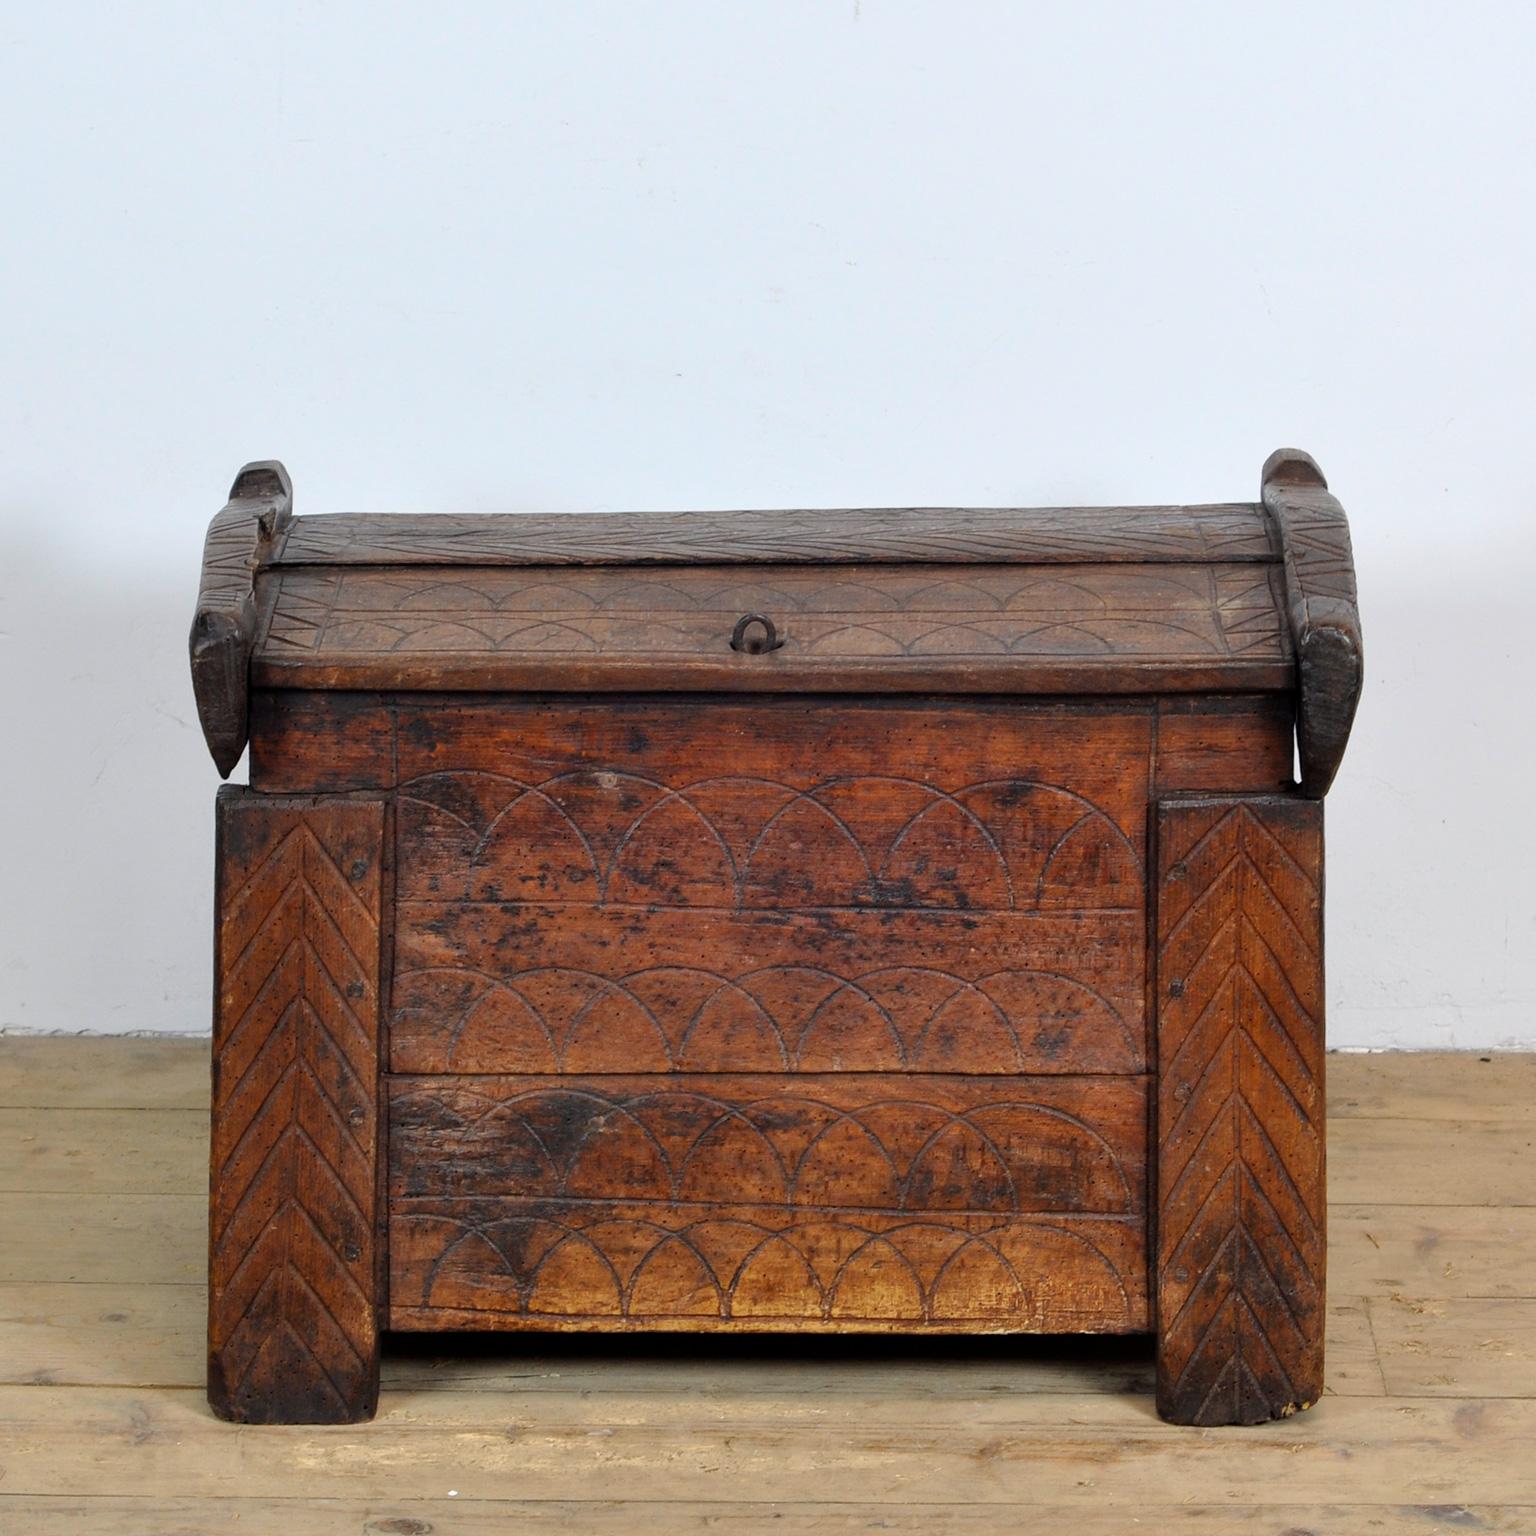 Hardwood chest from Moldava, circa 1800. The chest is decorated on the outside with carvings. 
The chest is free of woodworm. Over the years the two back legs became a bit shorter.